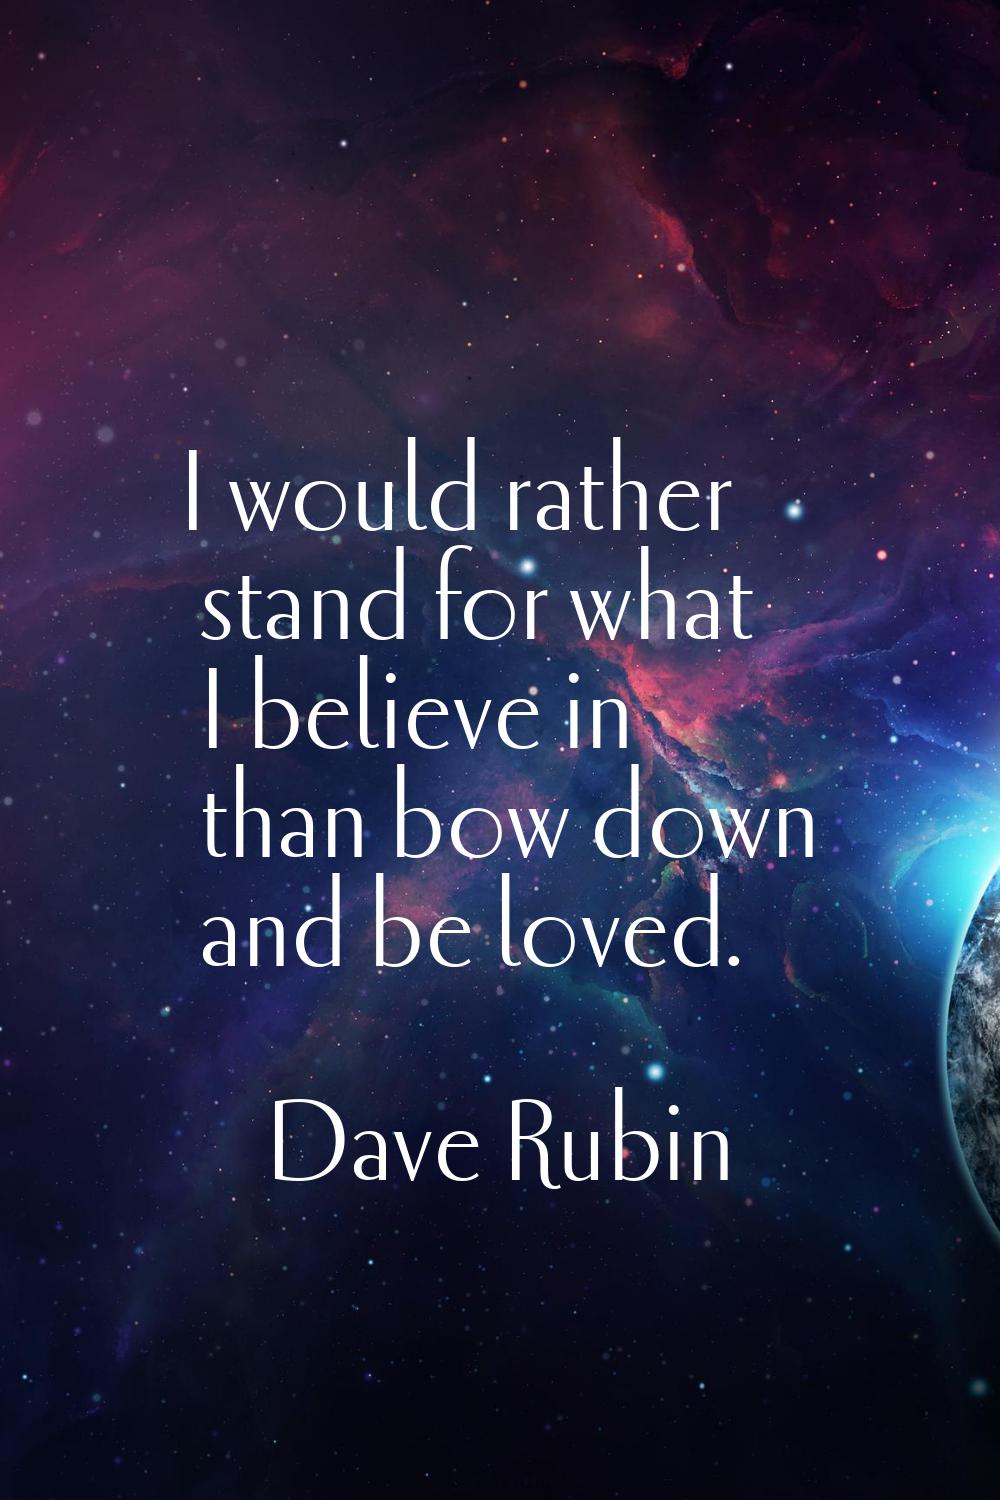 I would rather stand for what I believe in than bow down and be loved.